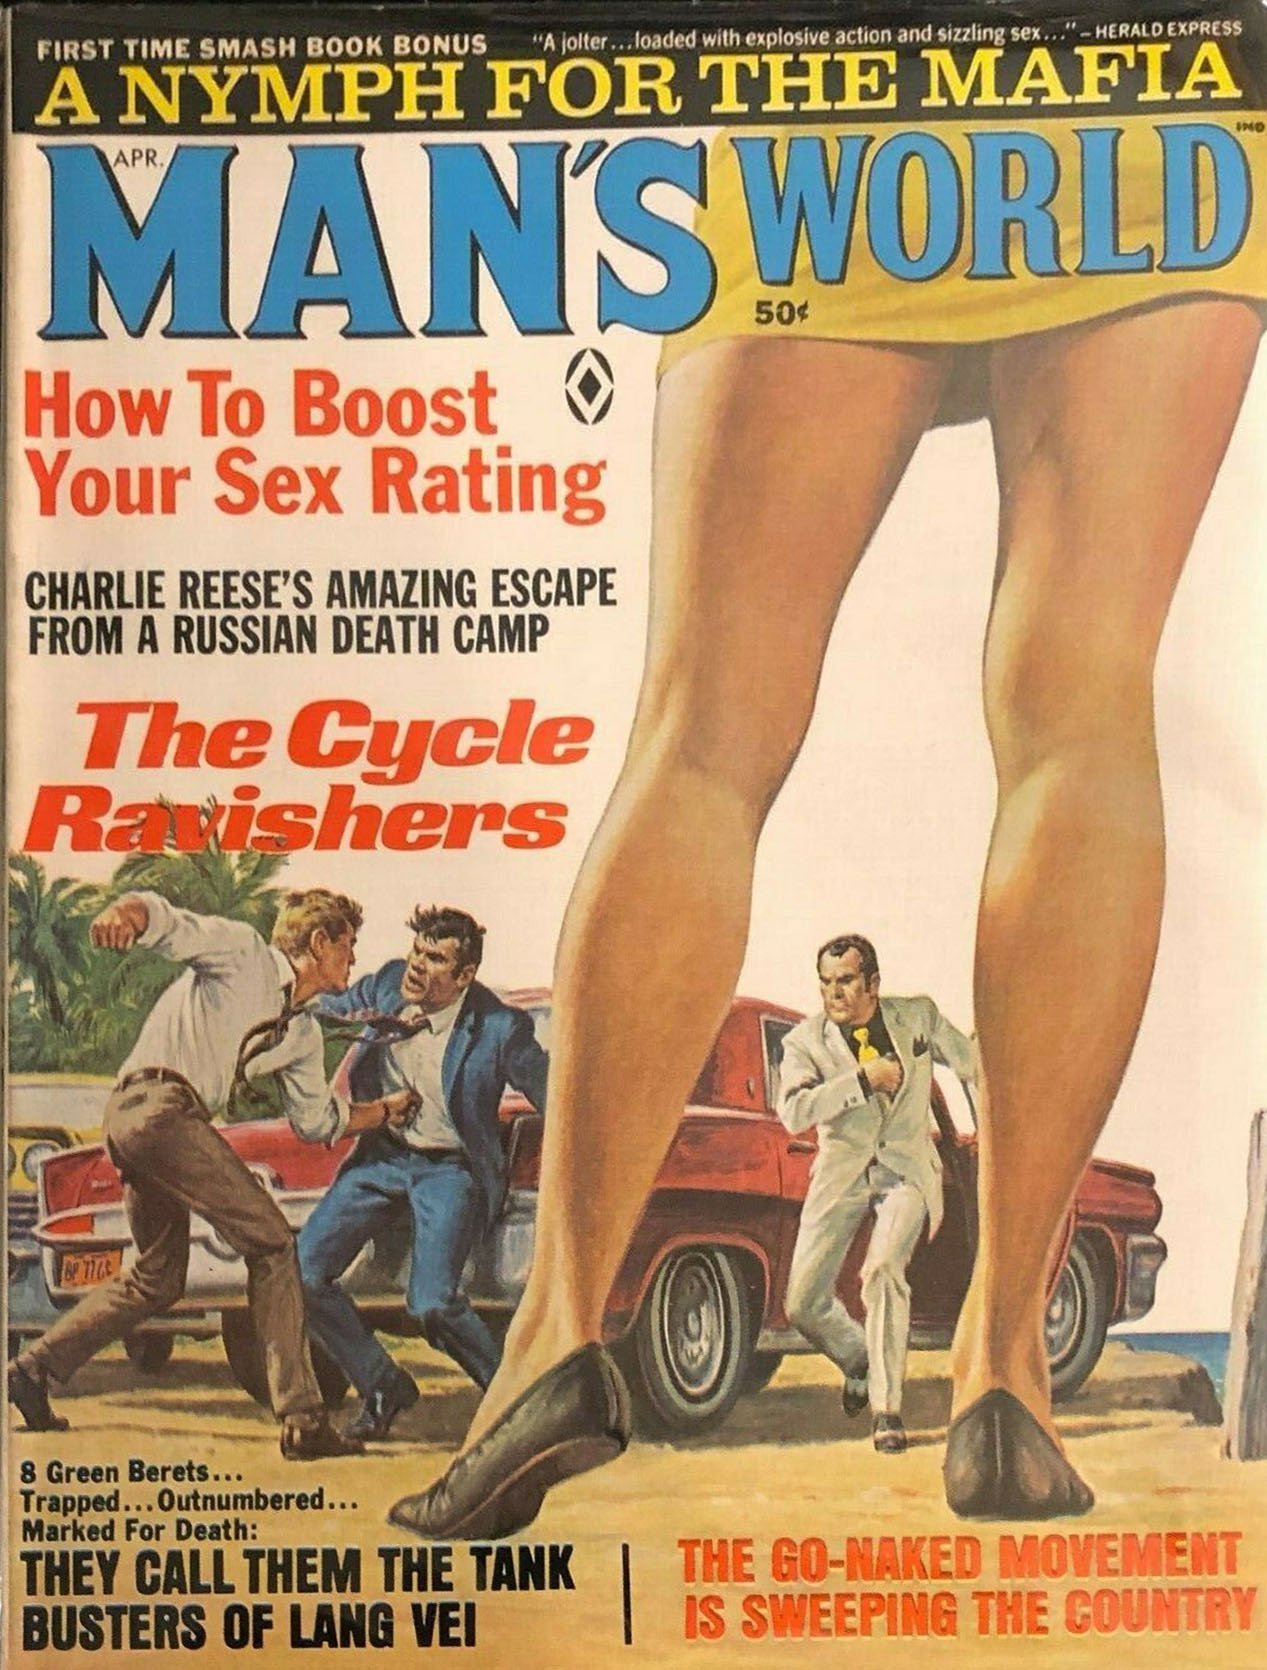 Man's World April 1969 magazine back issue Man's World magizine back copy Man's World April 1969 Adult Mens Magazine Back Issue Published for a Real Mans Needs. First Time Smash Book Bonus A Nymph For The Mafia.